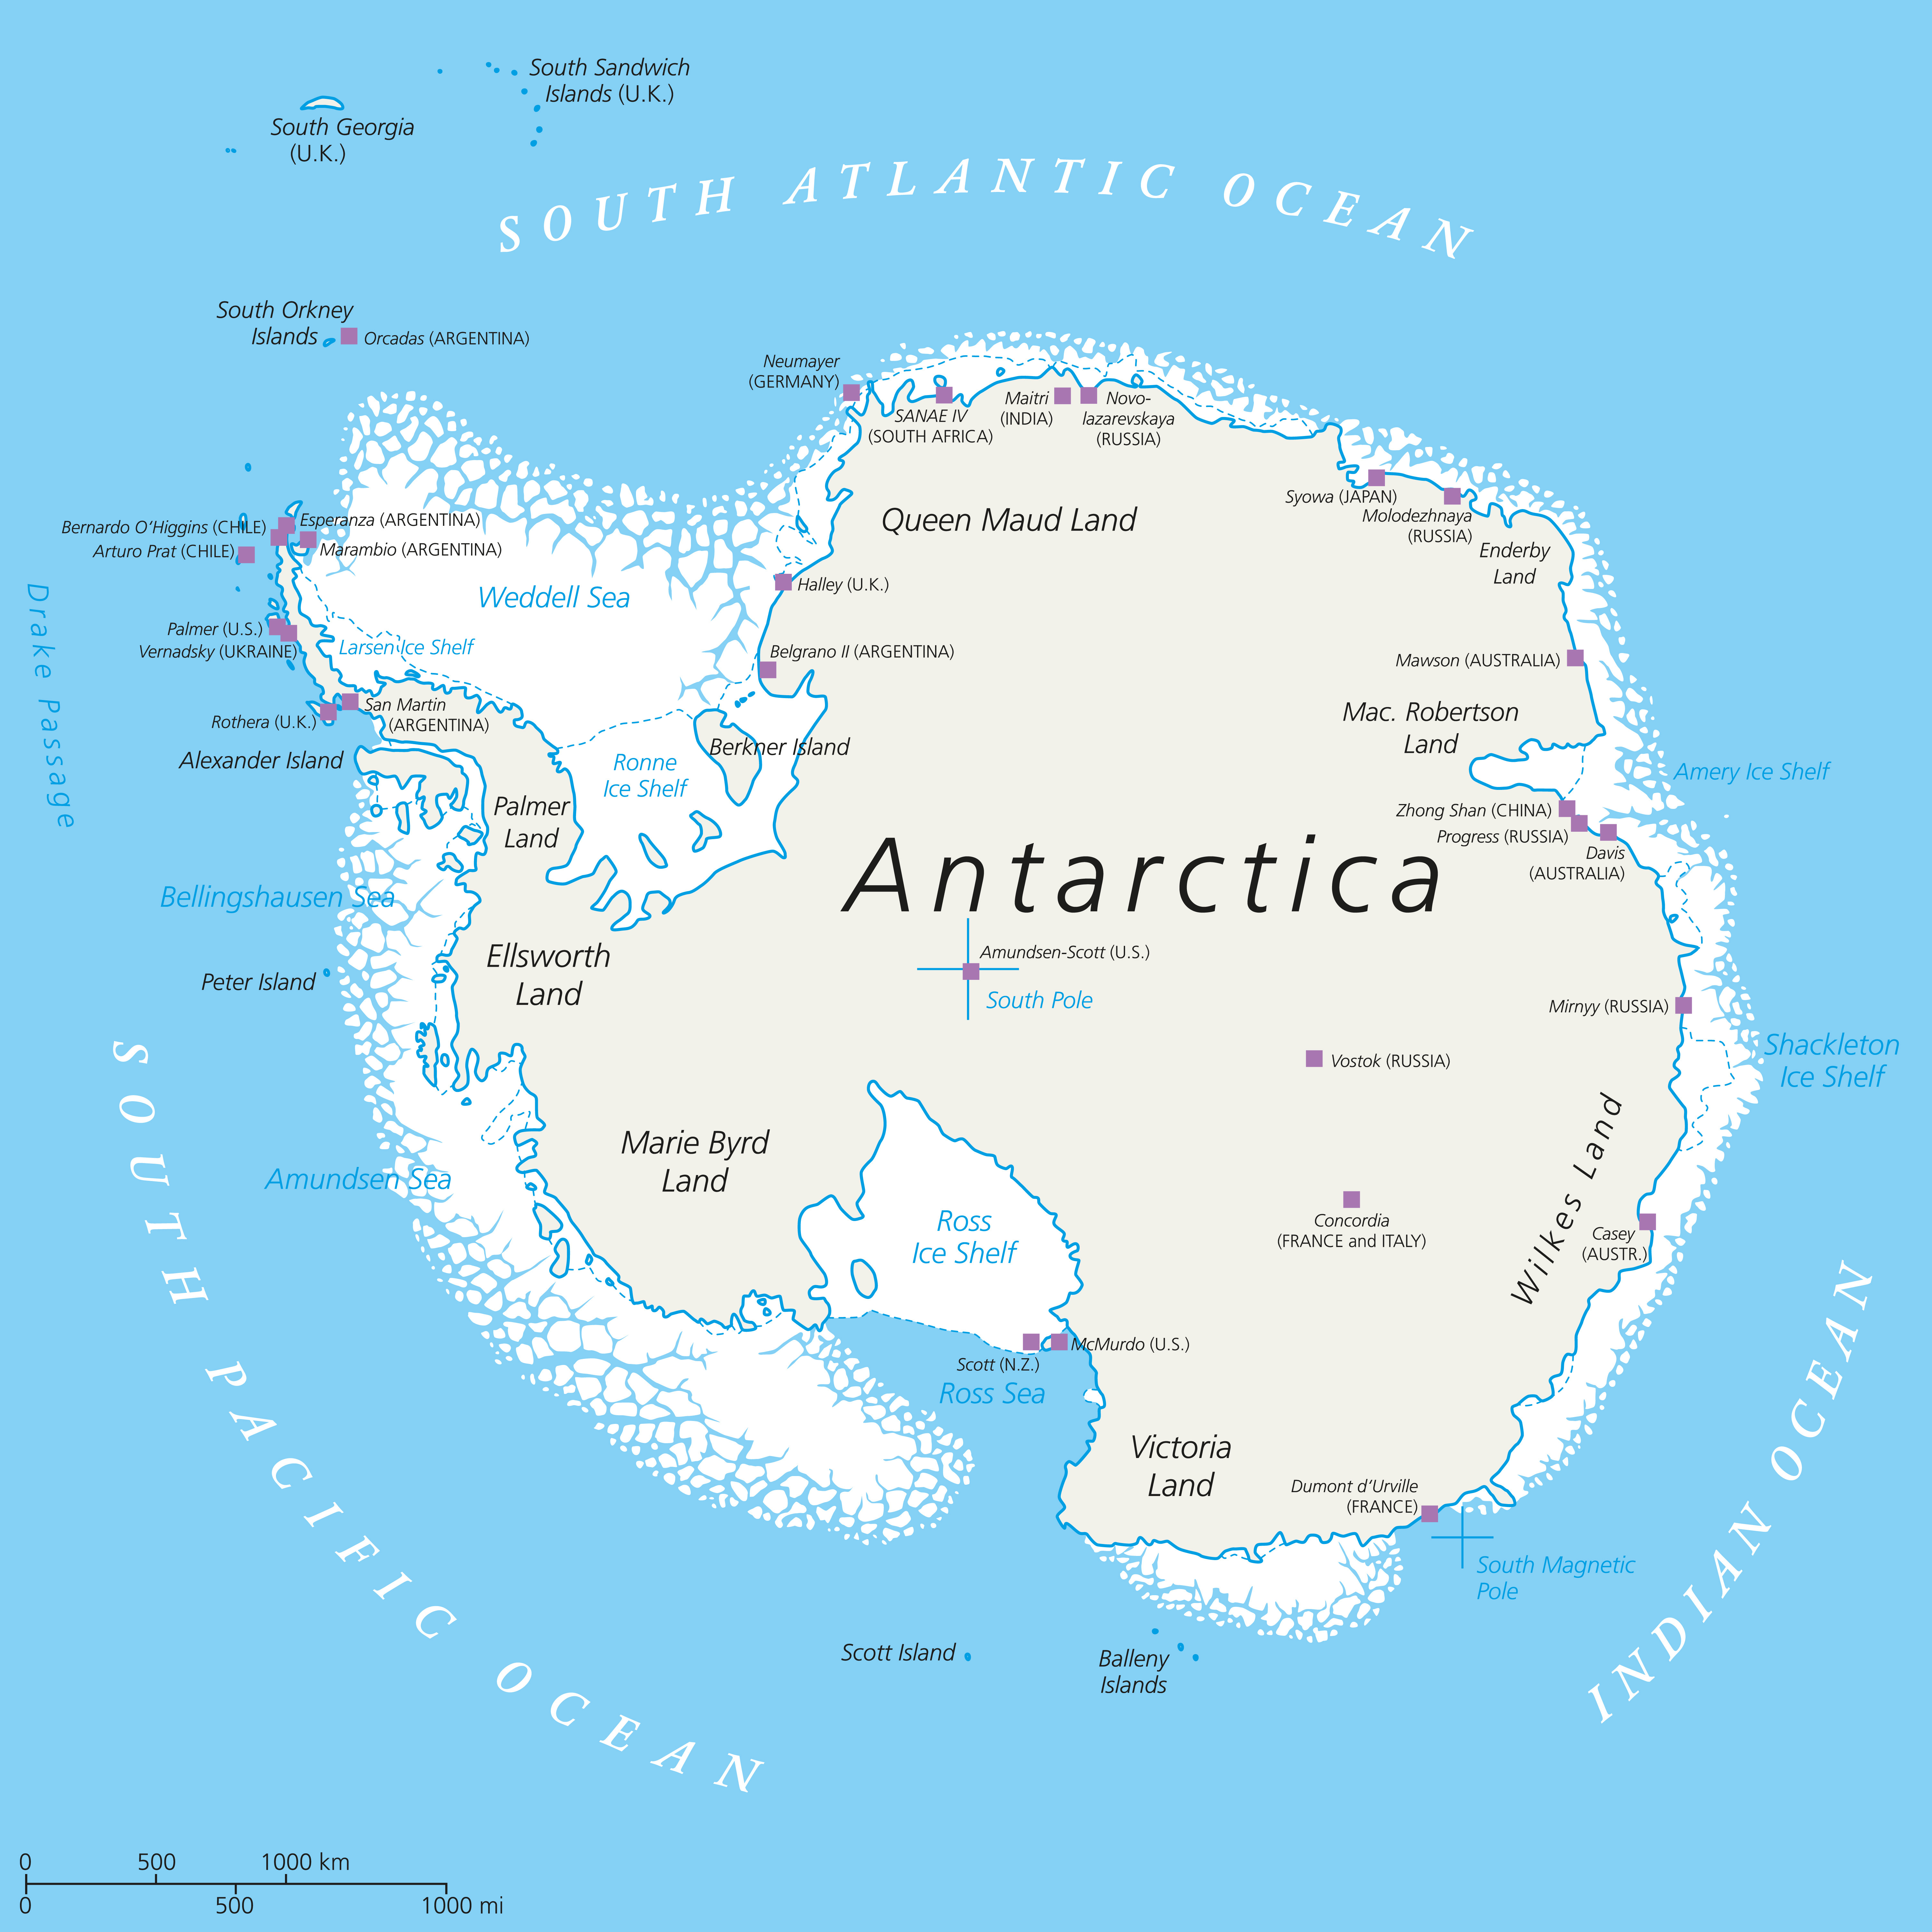 geography-antarctica-2-level-1-activity-for-kids-primaryleap-co-uk